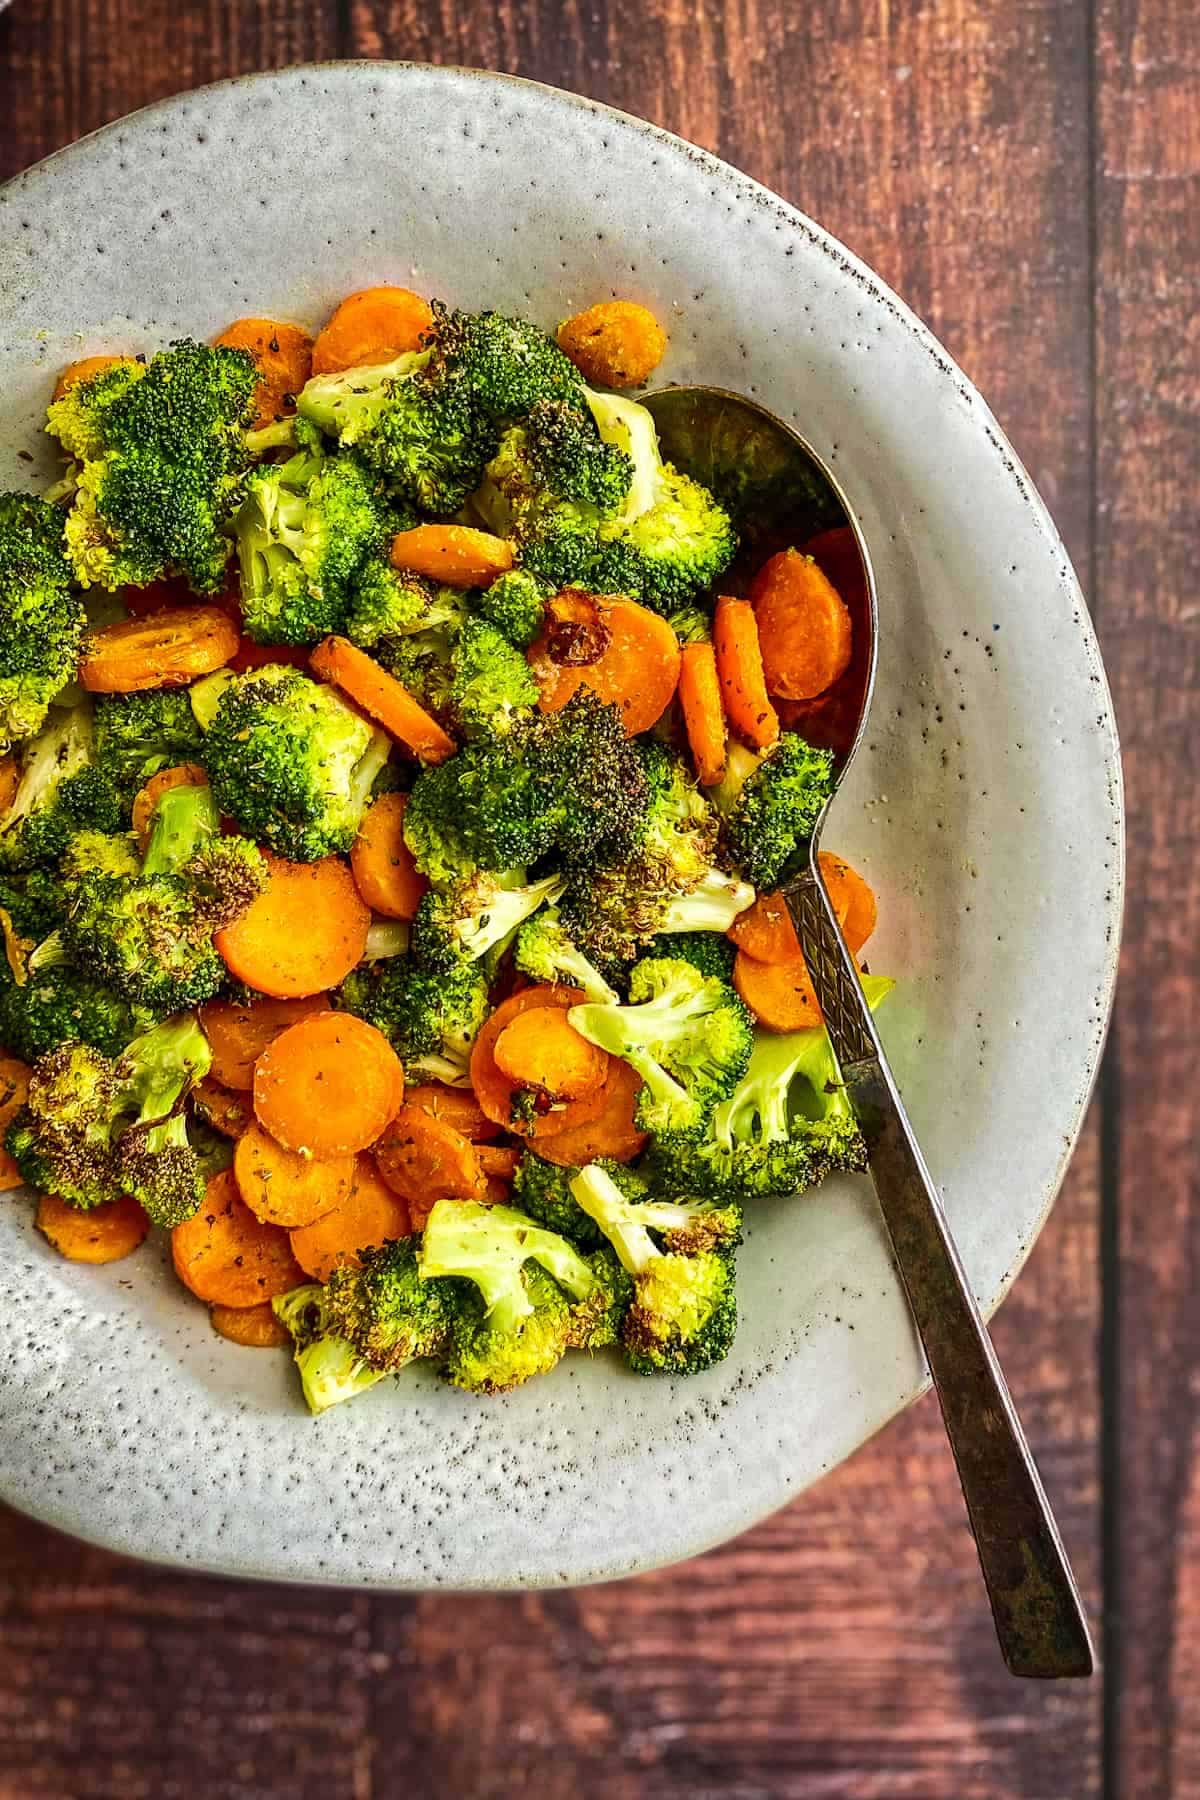 Air fryer broccoli and carrots